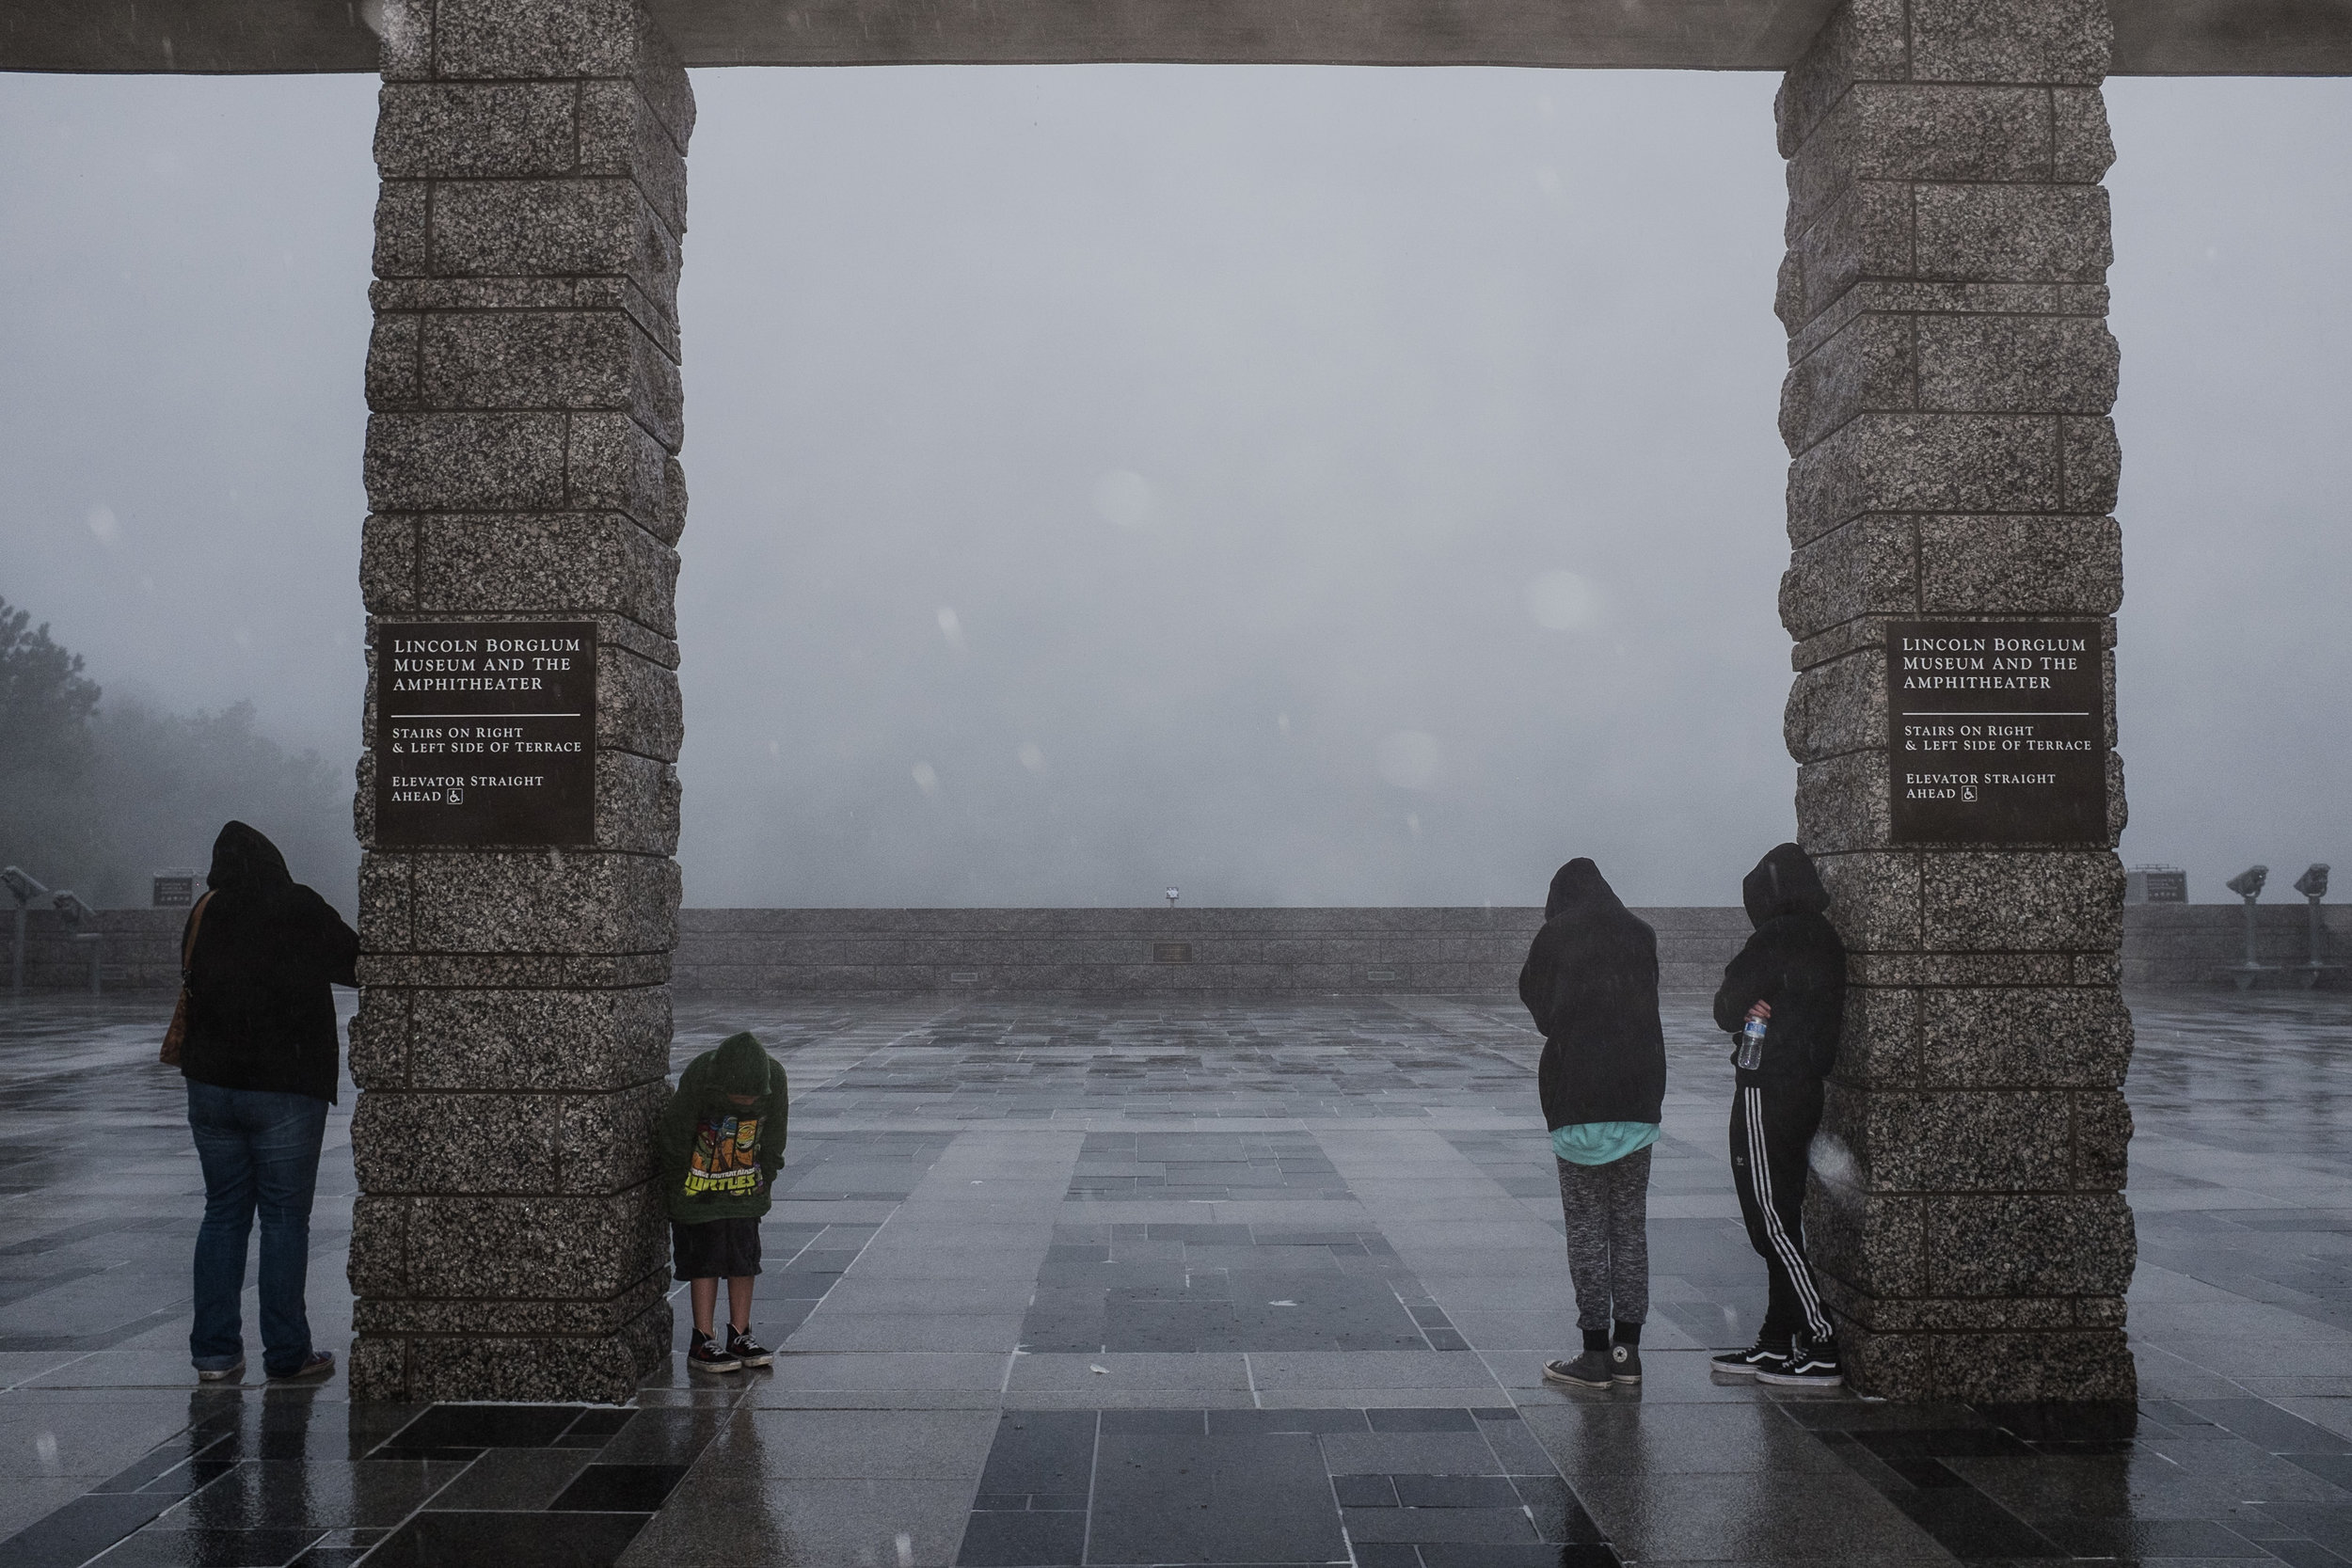  Mount Rushmore vanished by fog.  